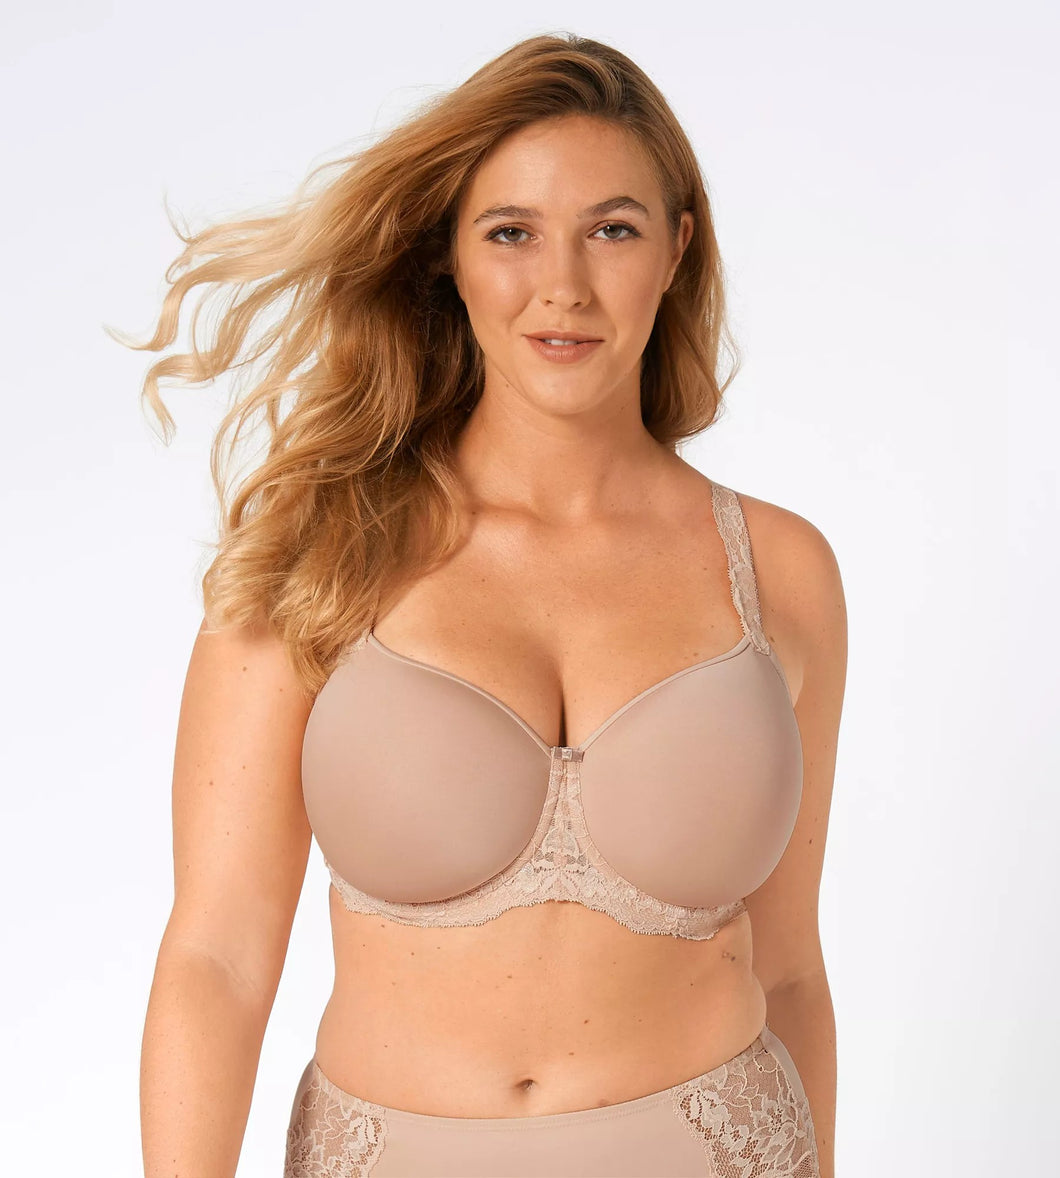 TRIUMPH<BR>
Amourette Charm, Wired, Padded Bra <BR>